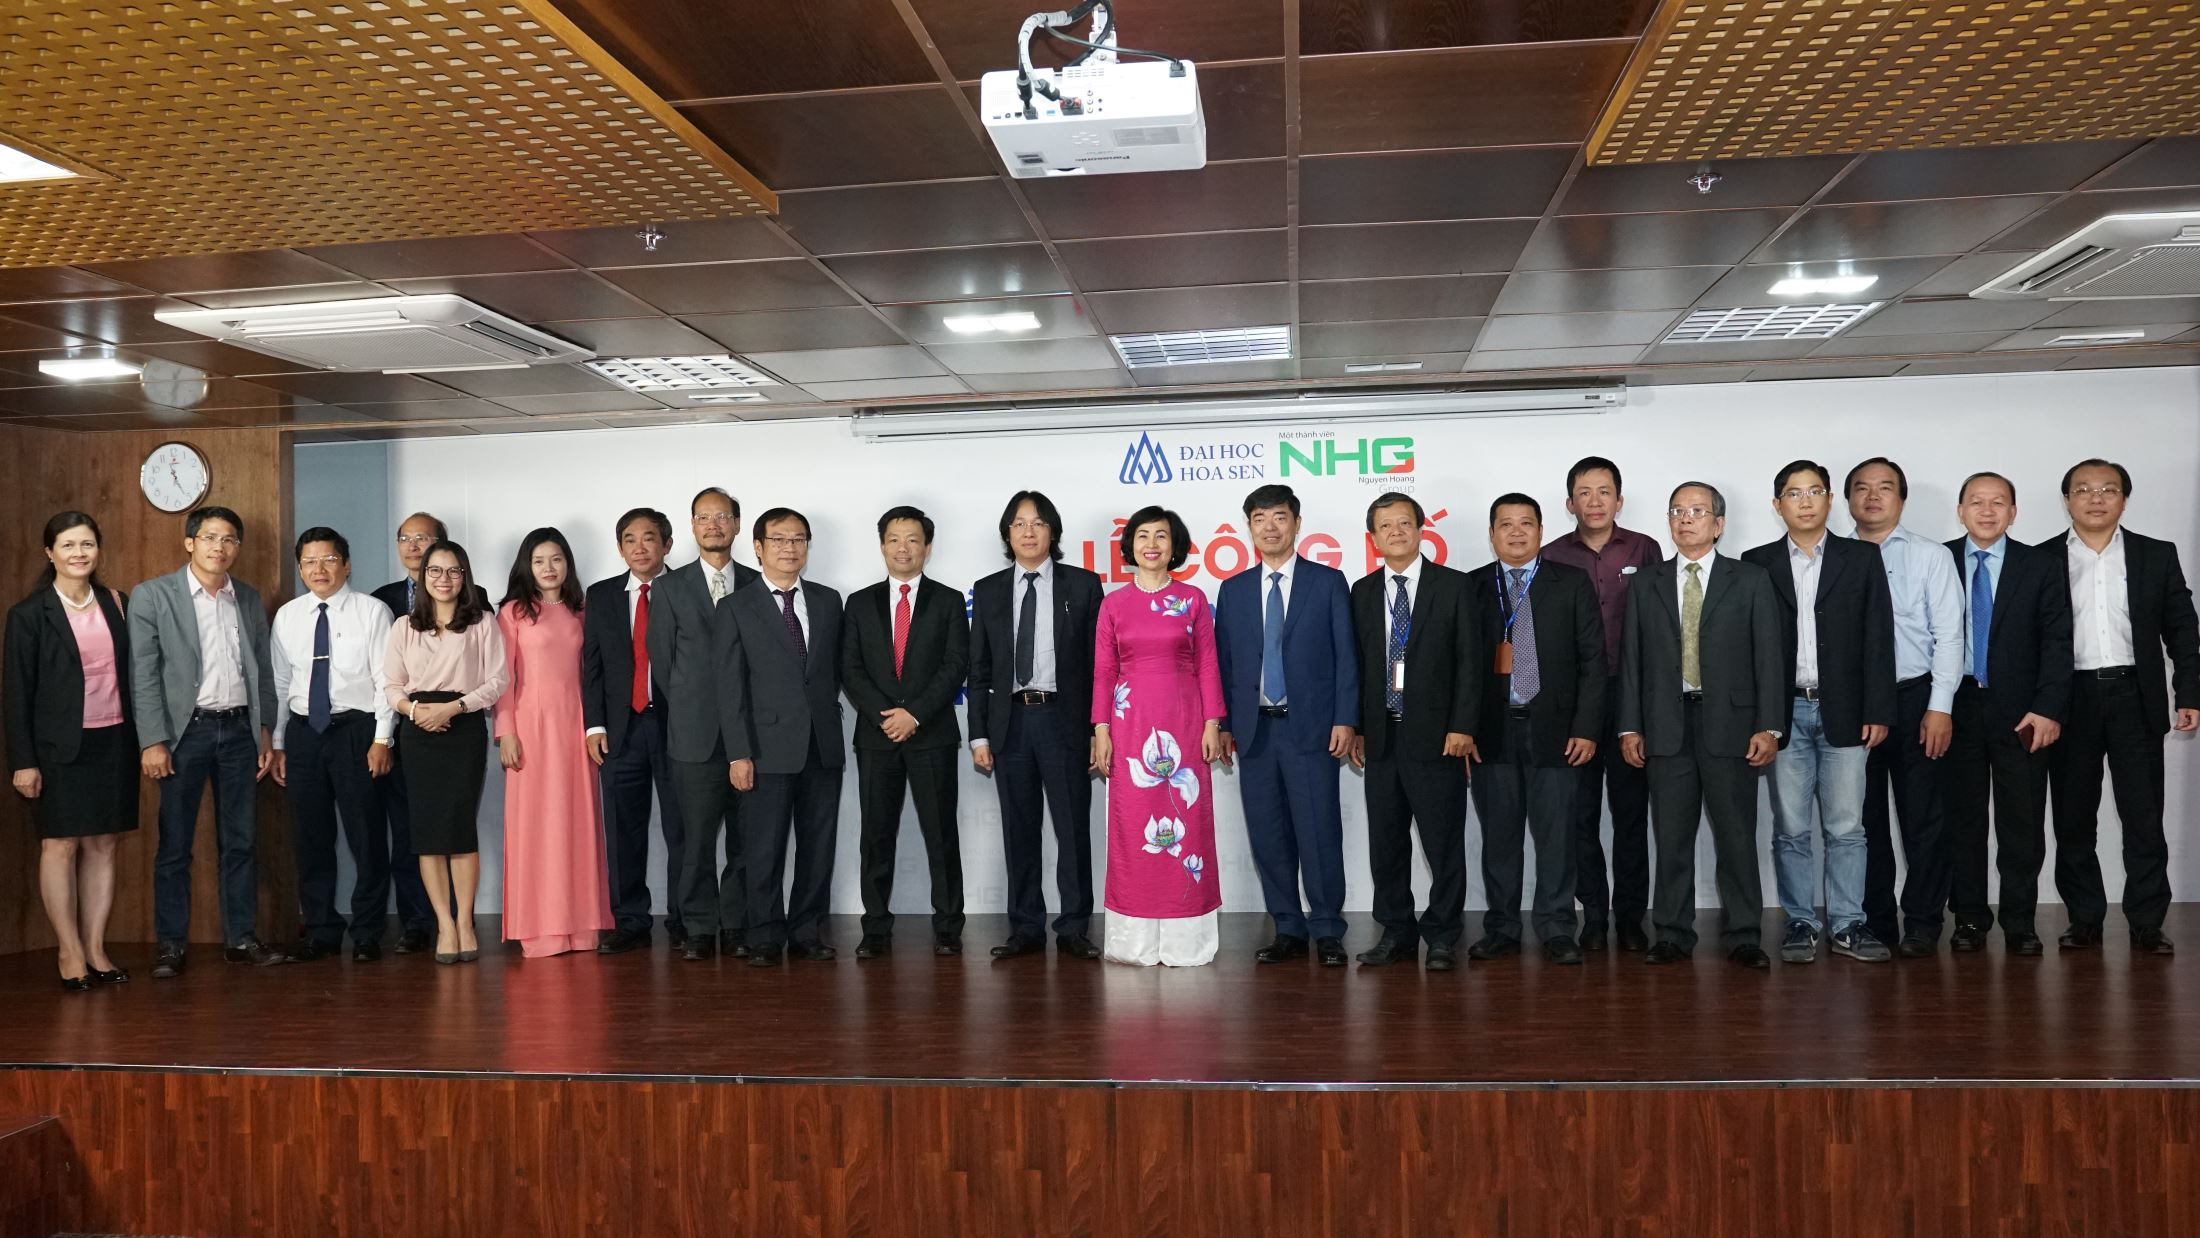 NHG board of directors, members in the new board of management, Professor, Dr. Mai Hong Quy and HSU lecturers taking photos in the ceremony